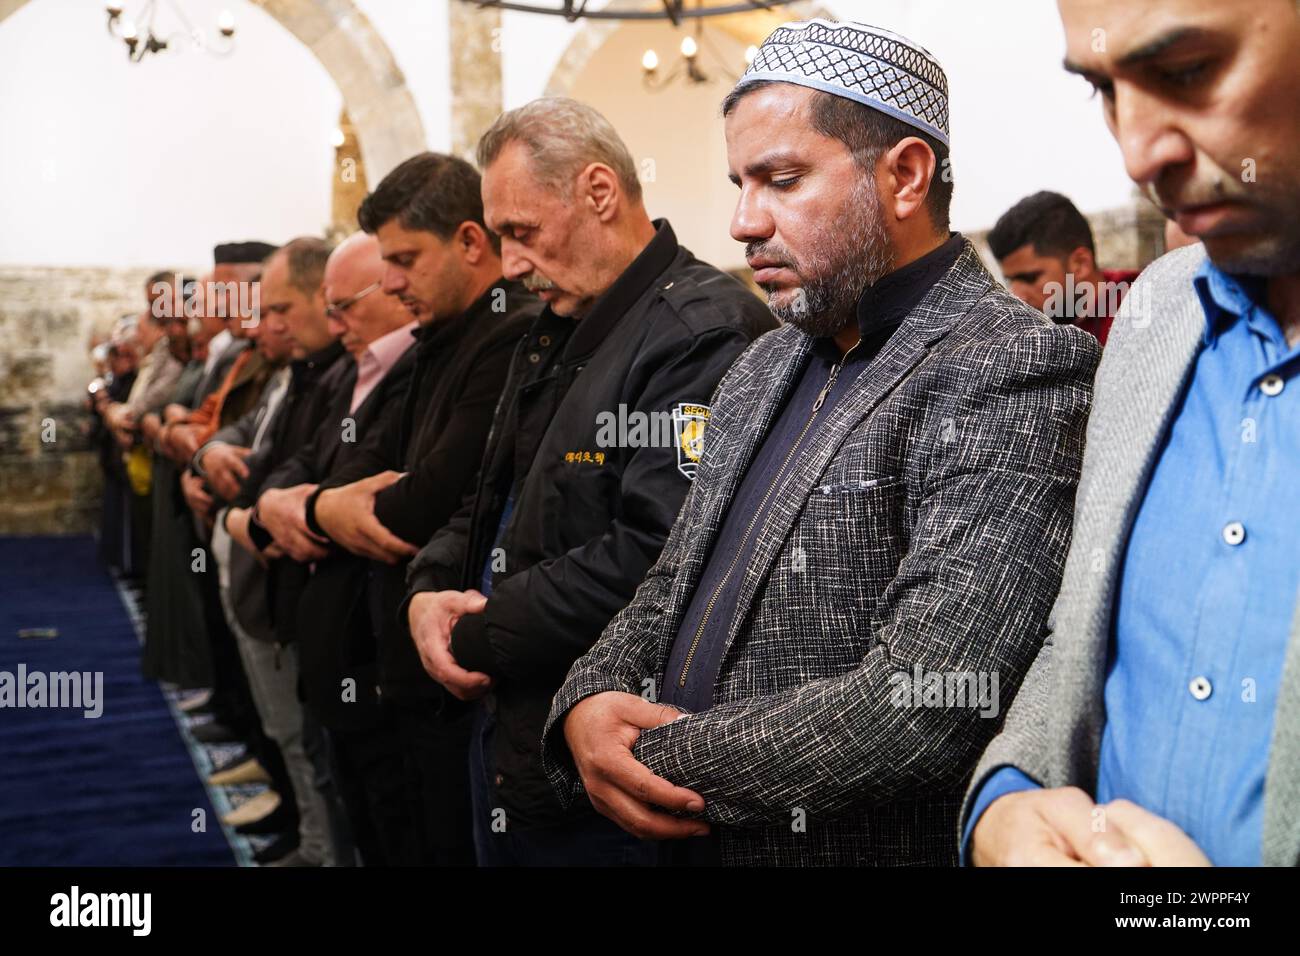 Muslims pray at Al-Masfi (Umayad) mosque in the old city of Mosul after its reopening and completion of its restoration. The Umayad mosque also known Al-Masfi mosque is considered the oldest in Mosul, the second oldest mosque in Iraq, and the 5th oldest mosque in Islam. It dates back to the year 16 AH (637 AD). The mosque was damaged during the operations to liberate the city of Mosul from ISIS, and the mosque was reconstructed by the ALIPH organization in cooperation with LA GUILDE Association and Al-Tameer International Group, in cooperation with the Sunni Endowment Office and the Nineveh An Stock Photo